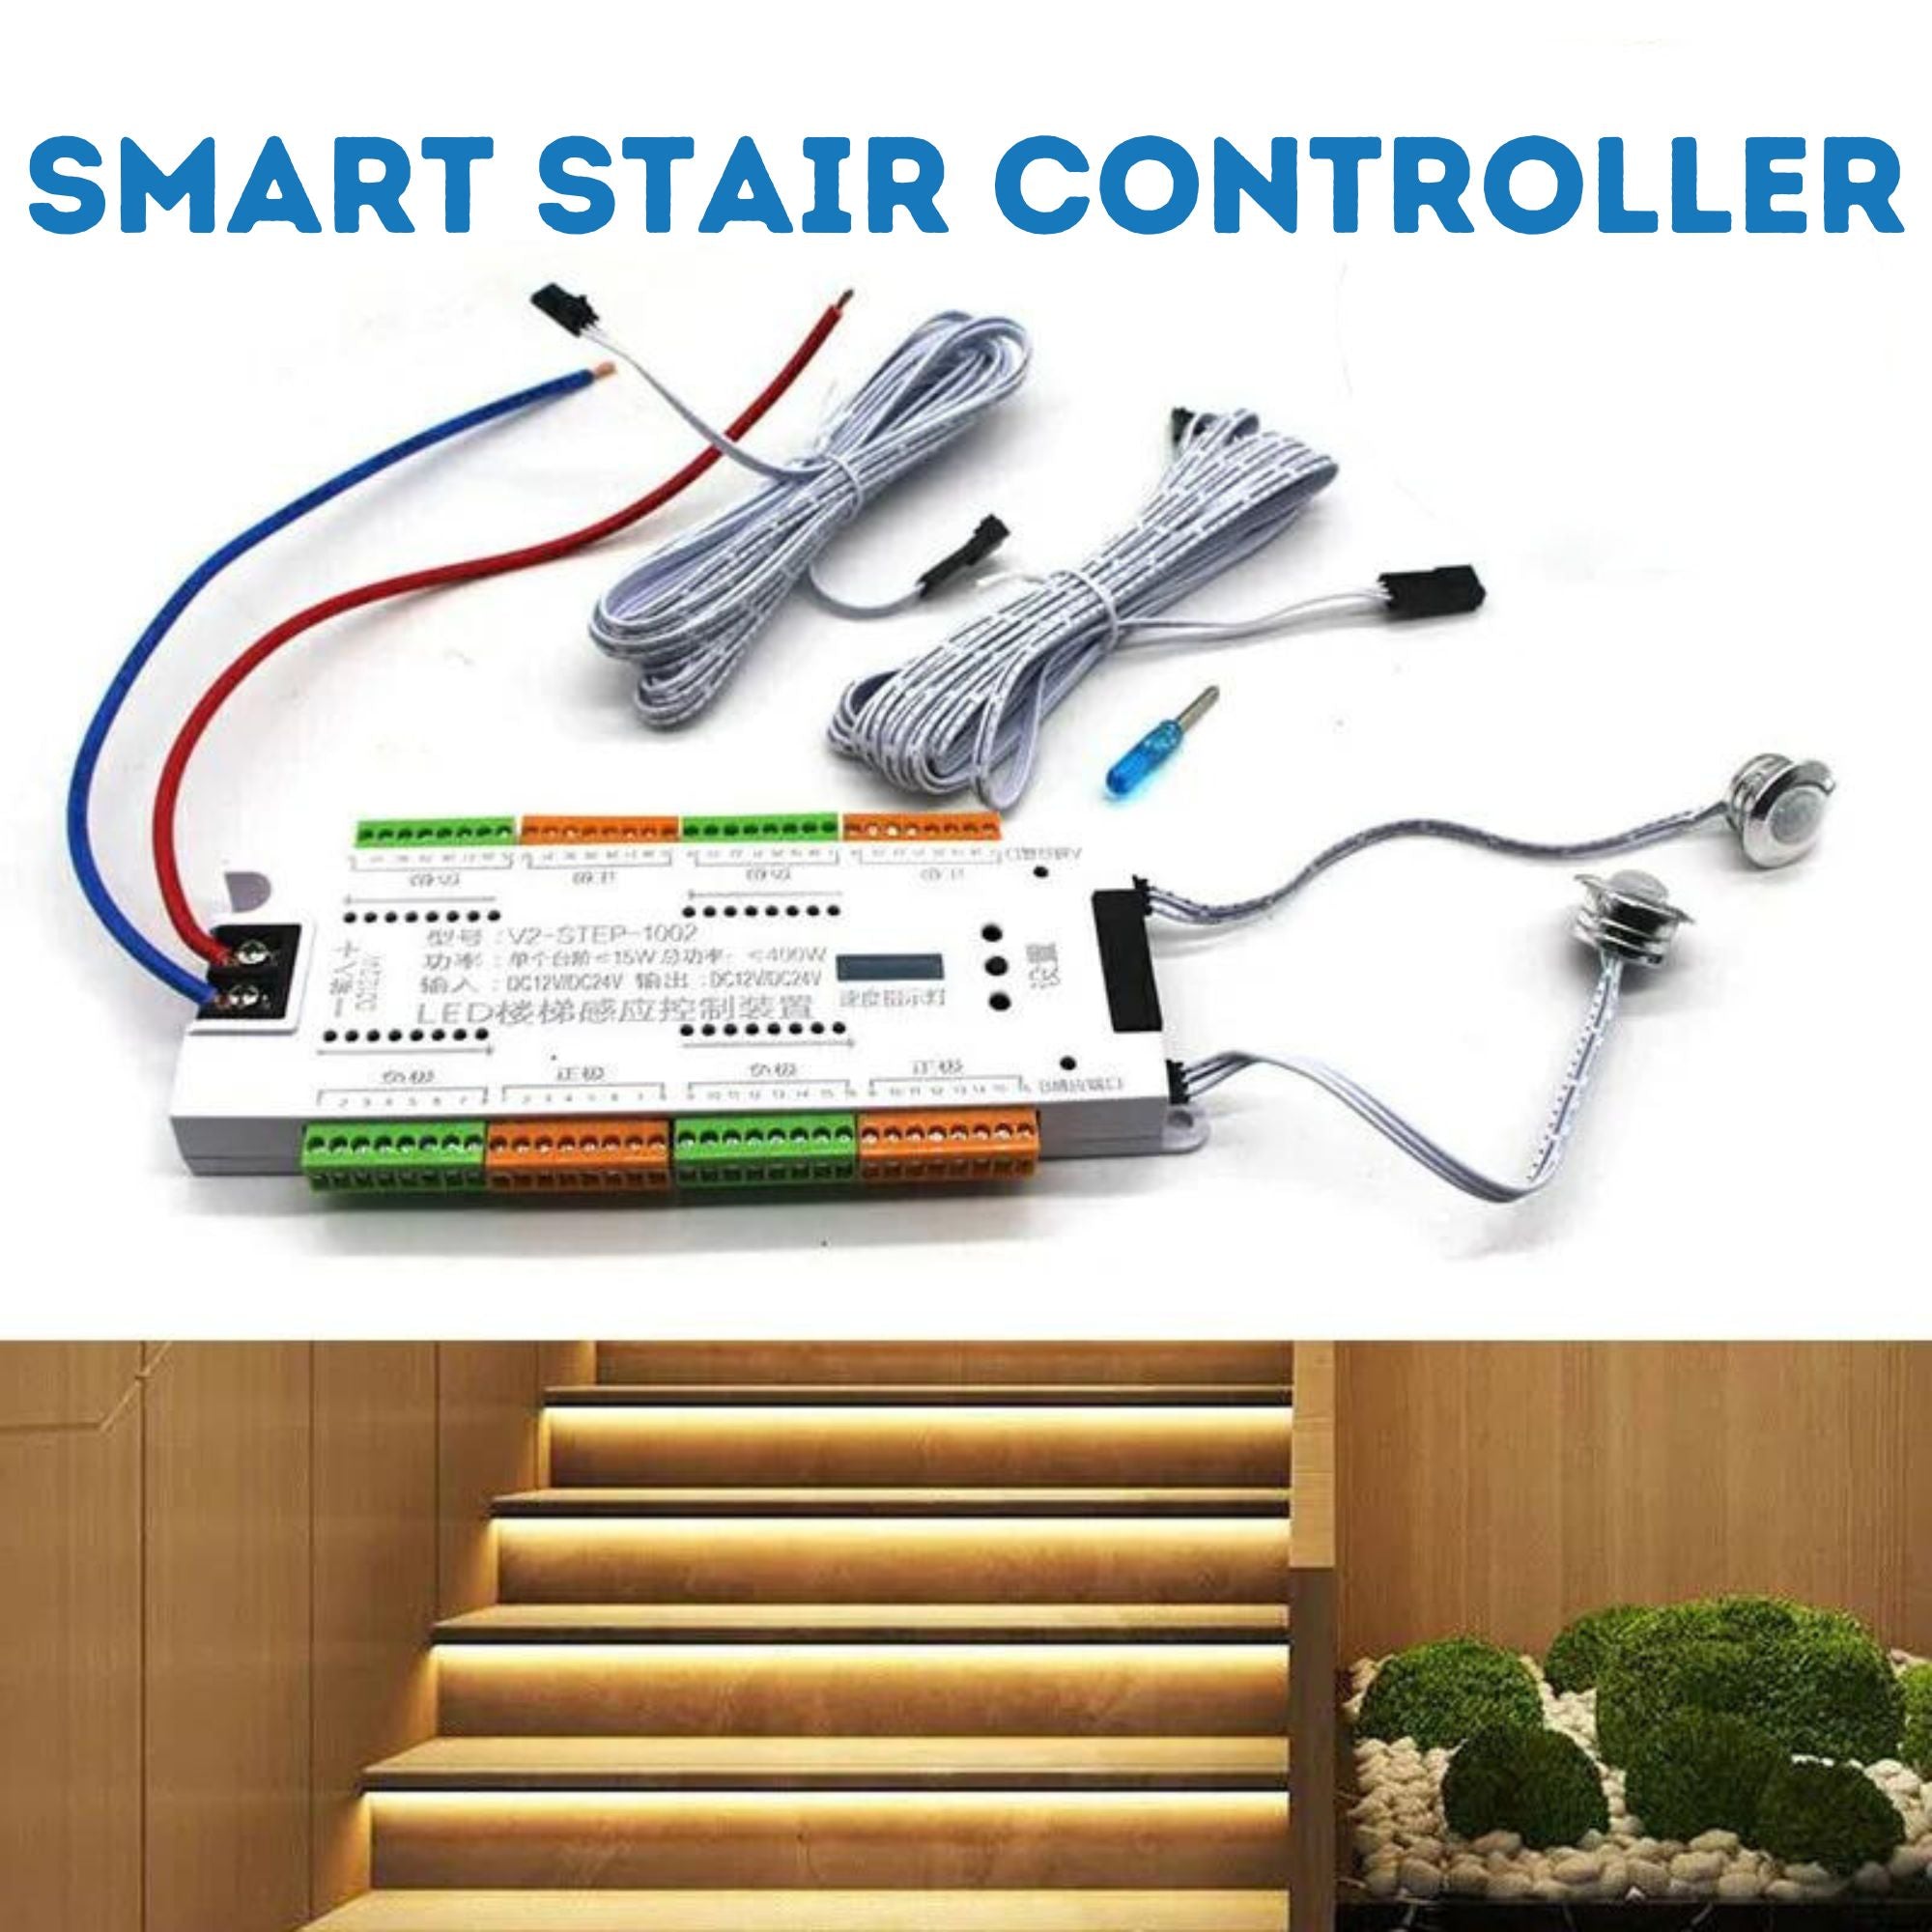 Brighter Stairs, Safer Home: The Power of Smart Stair Controllers with Sensors